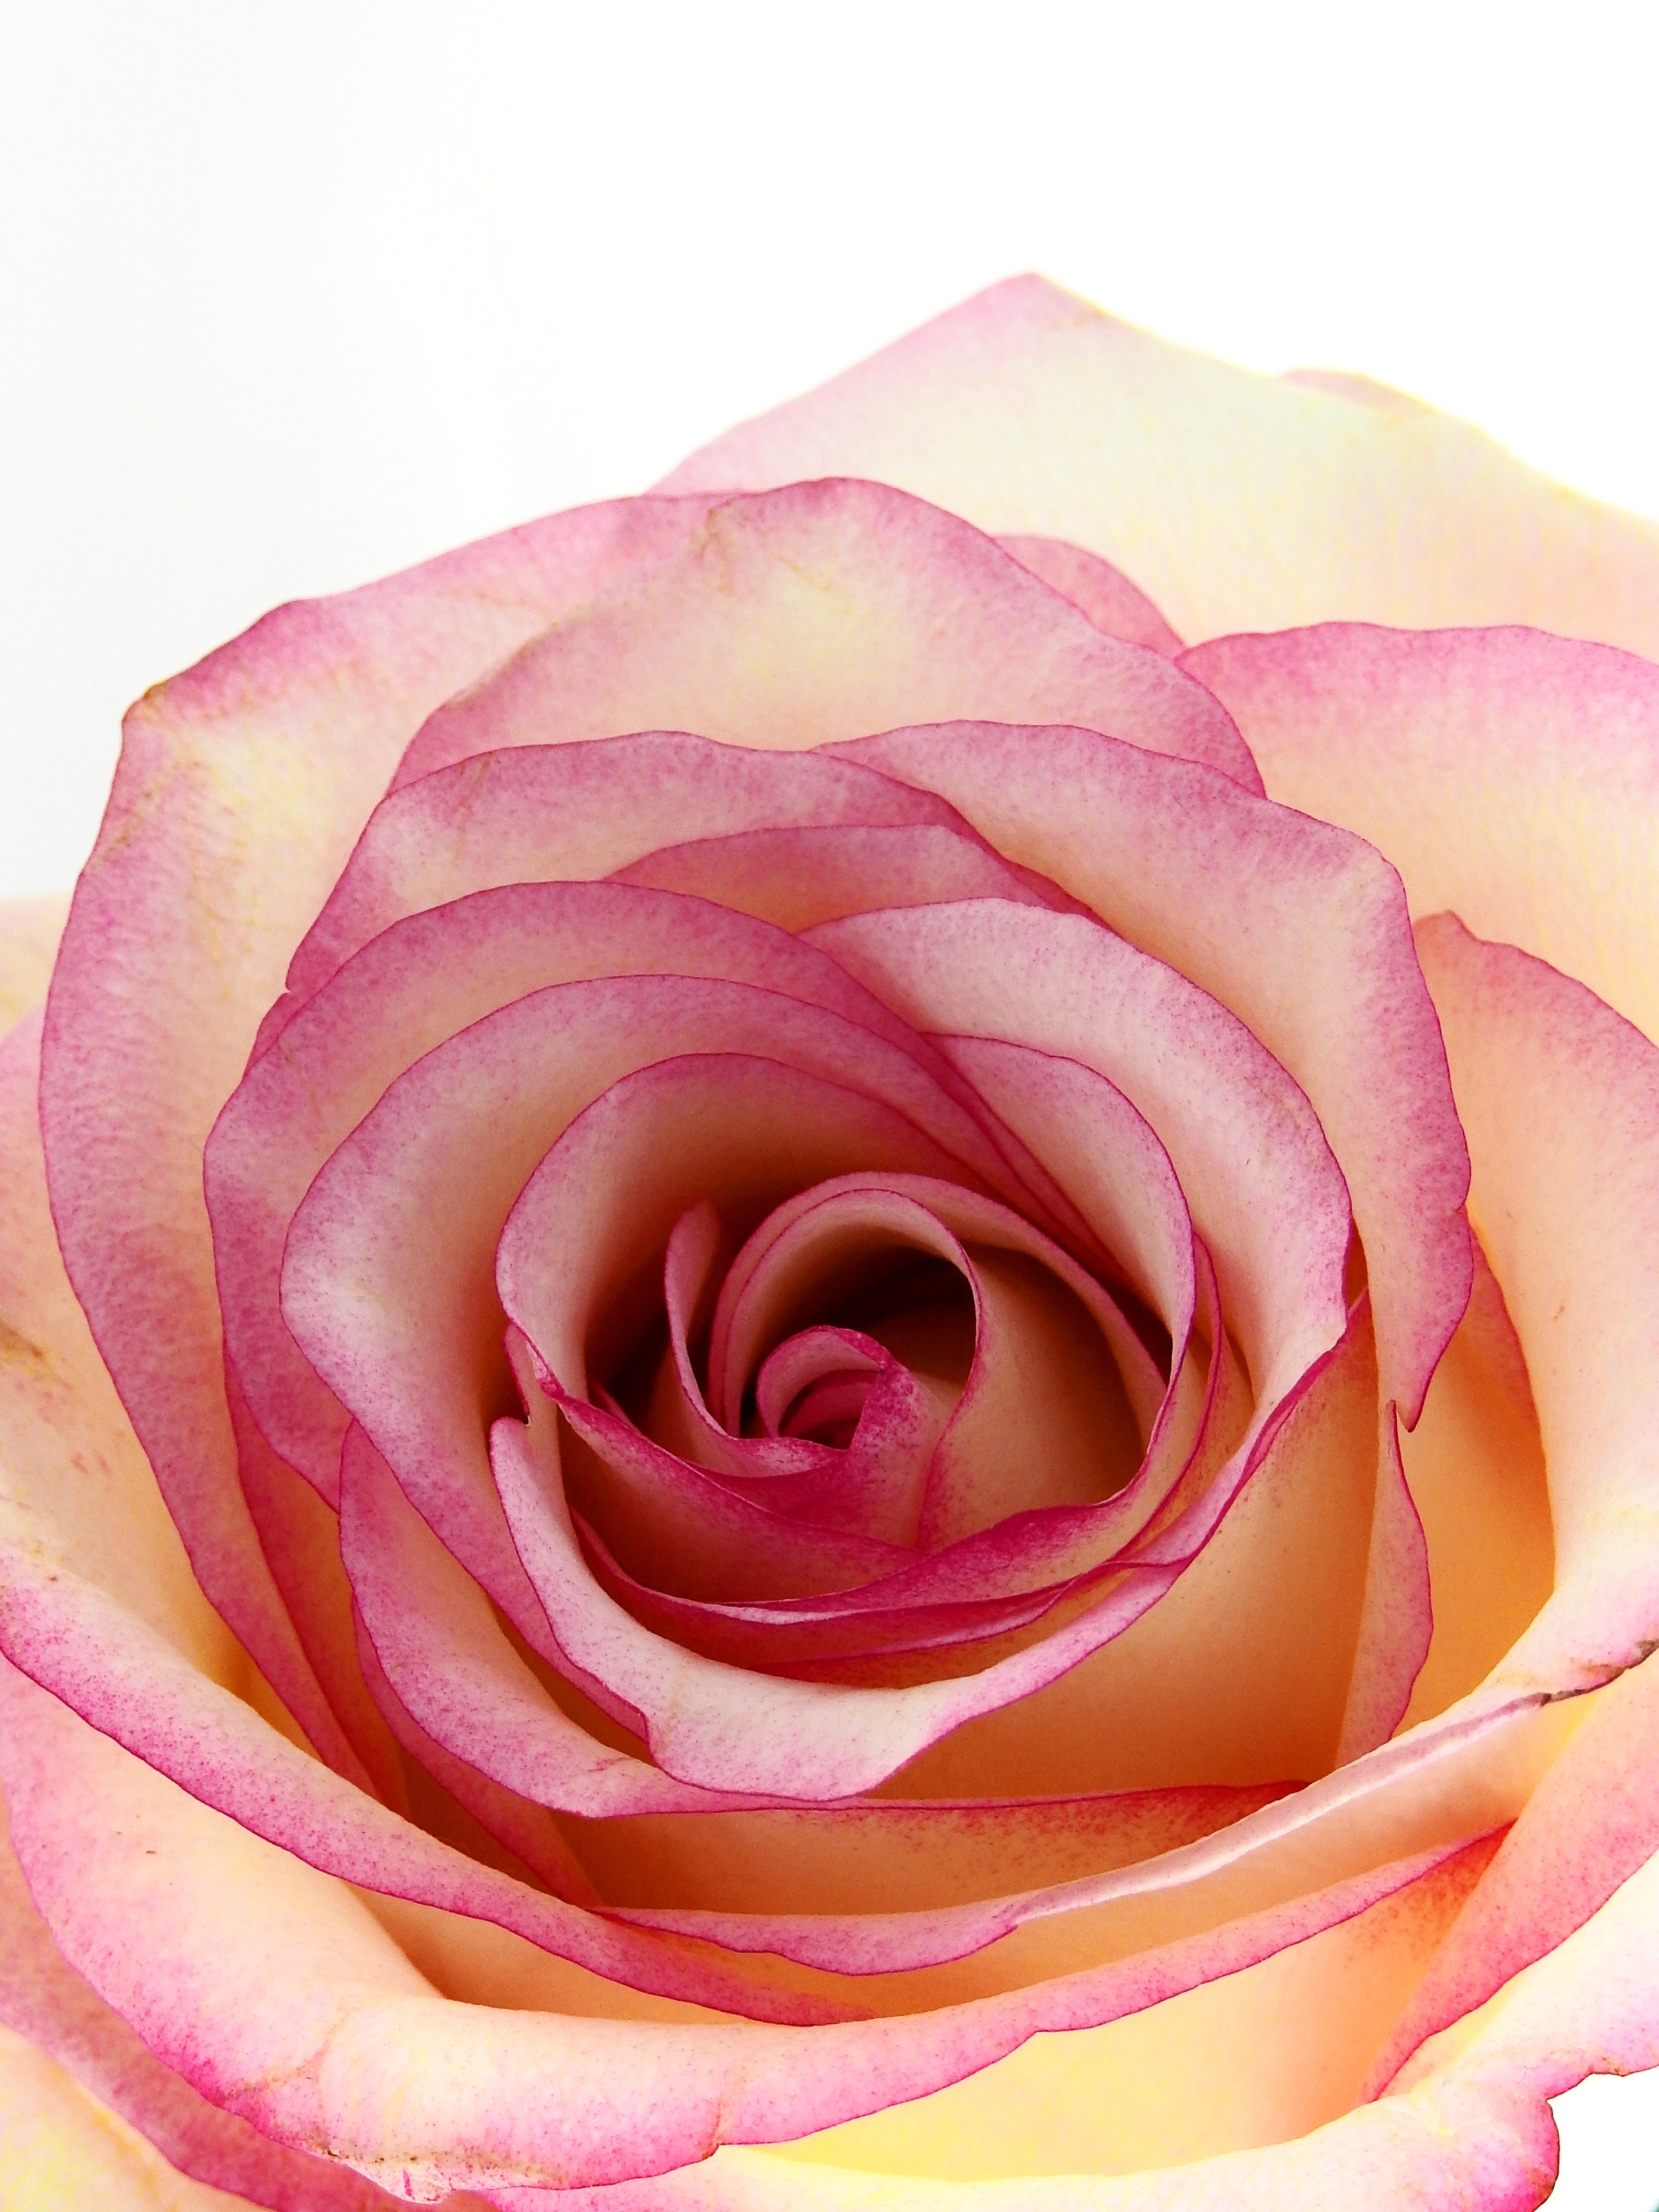 pink and white rose petal